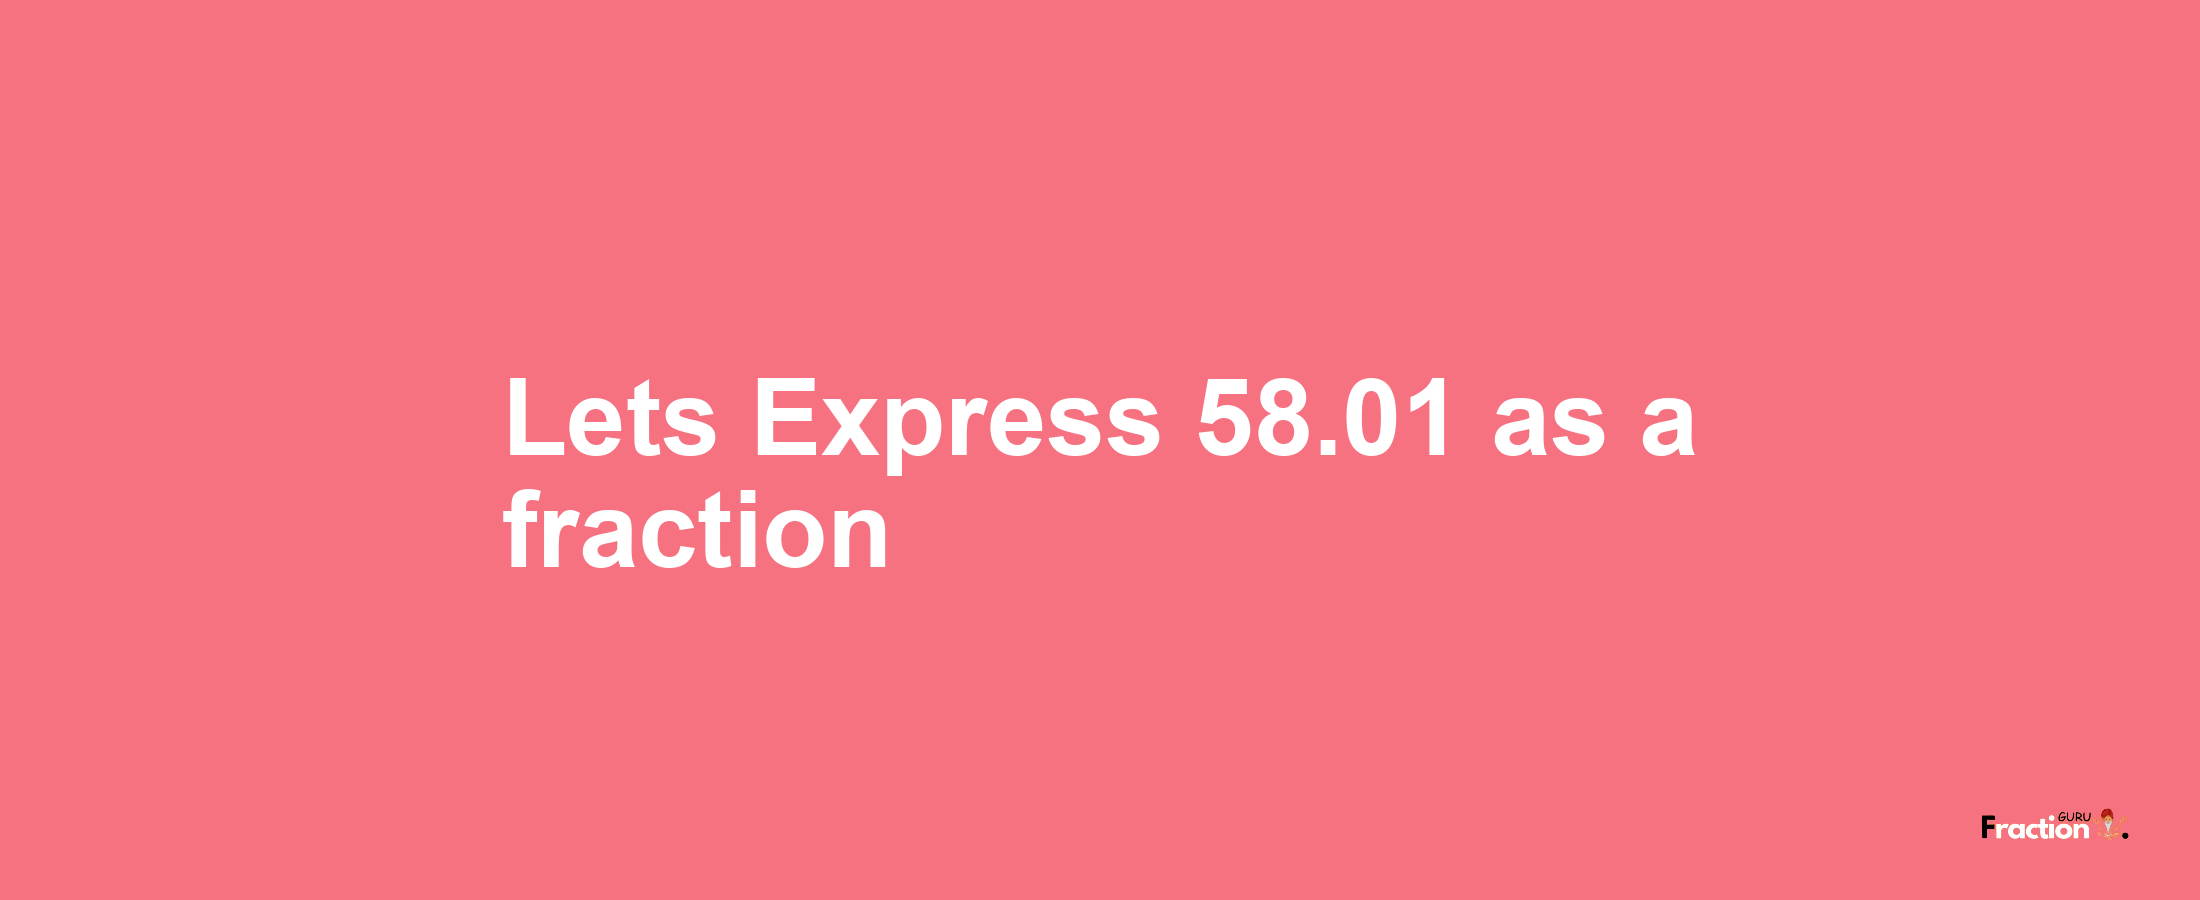 Lets Express 58.01 as afraction